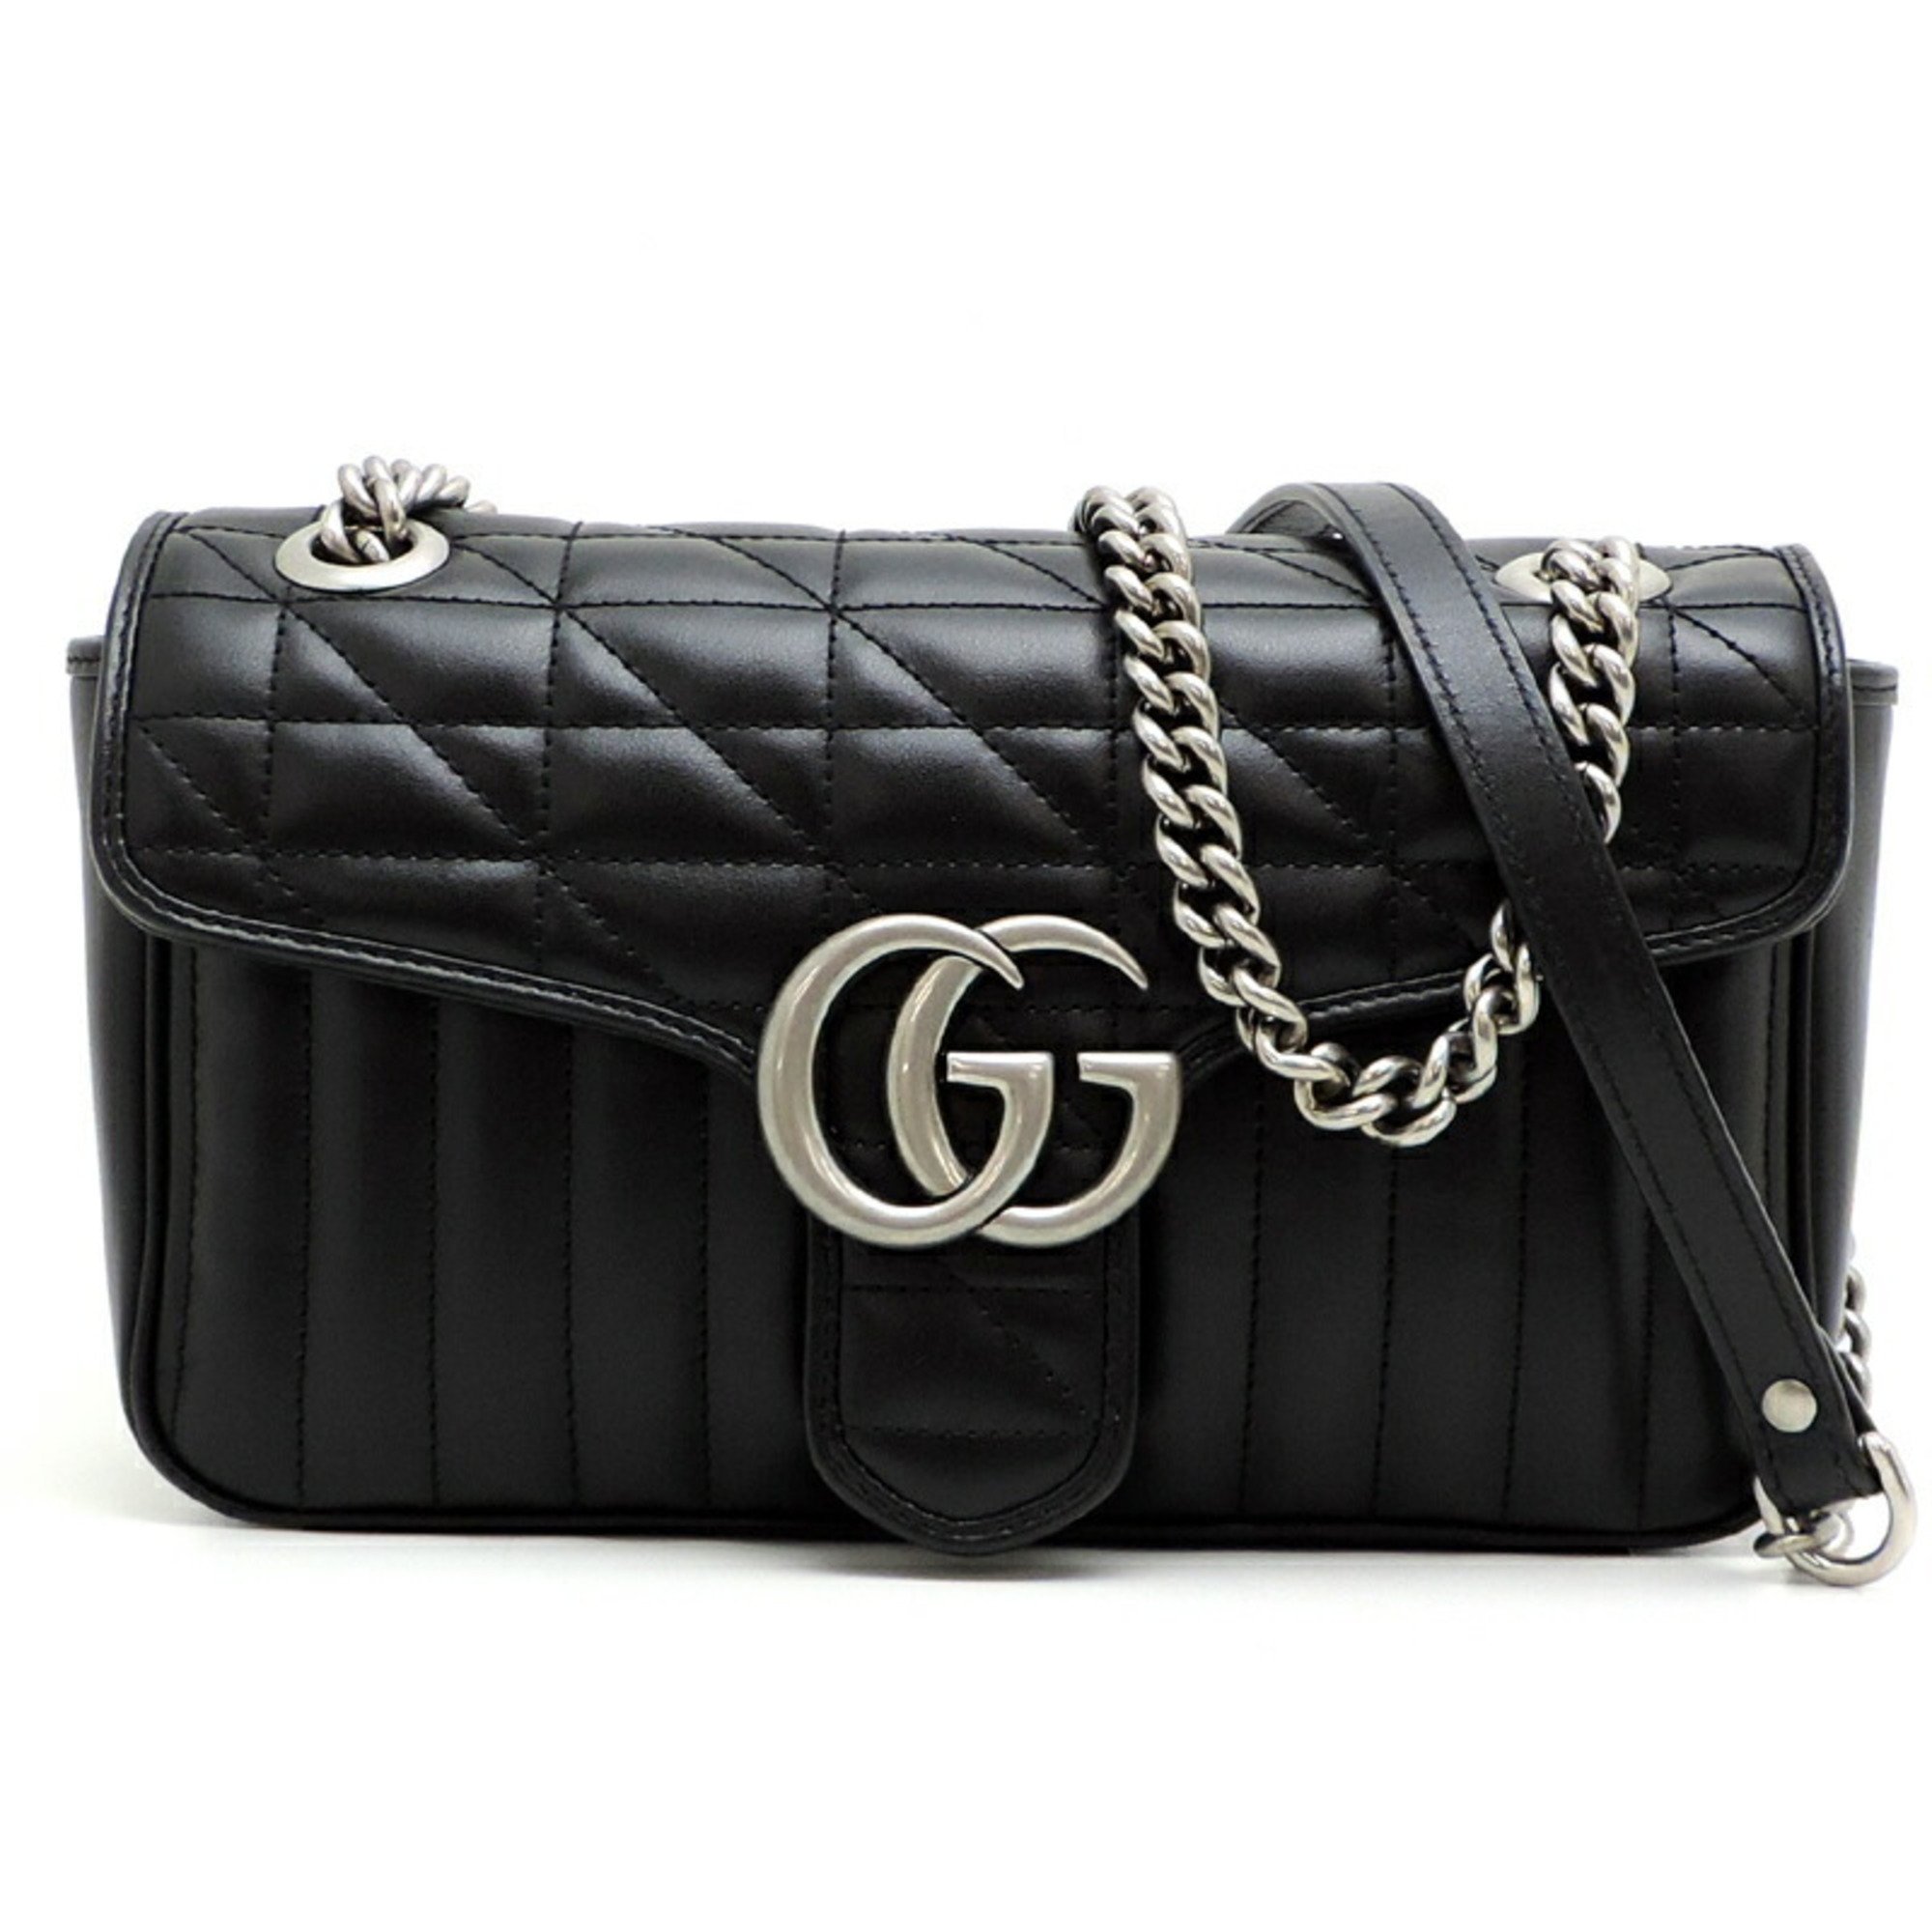 Gucci GG Marmont Small Chain Women's Shoulder Bag 443497 Leather Black